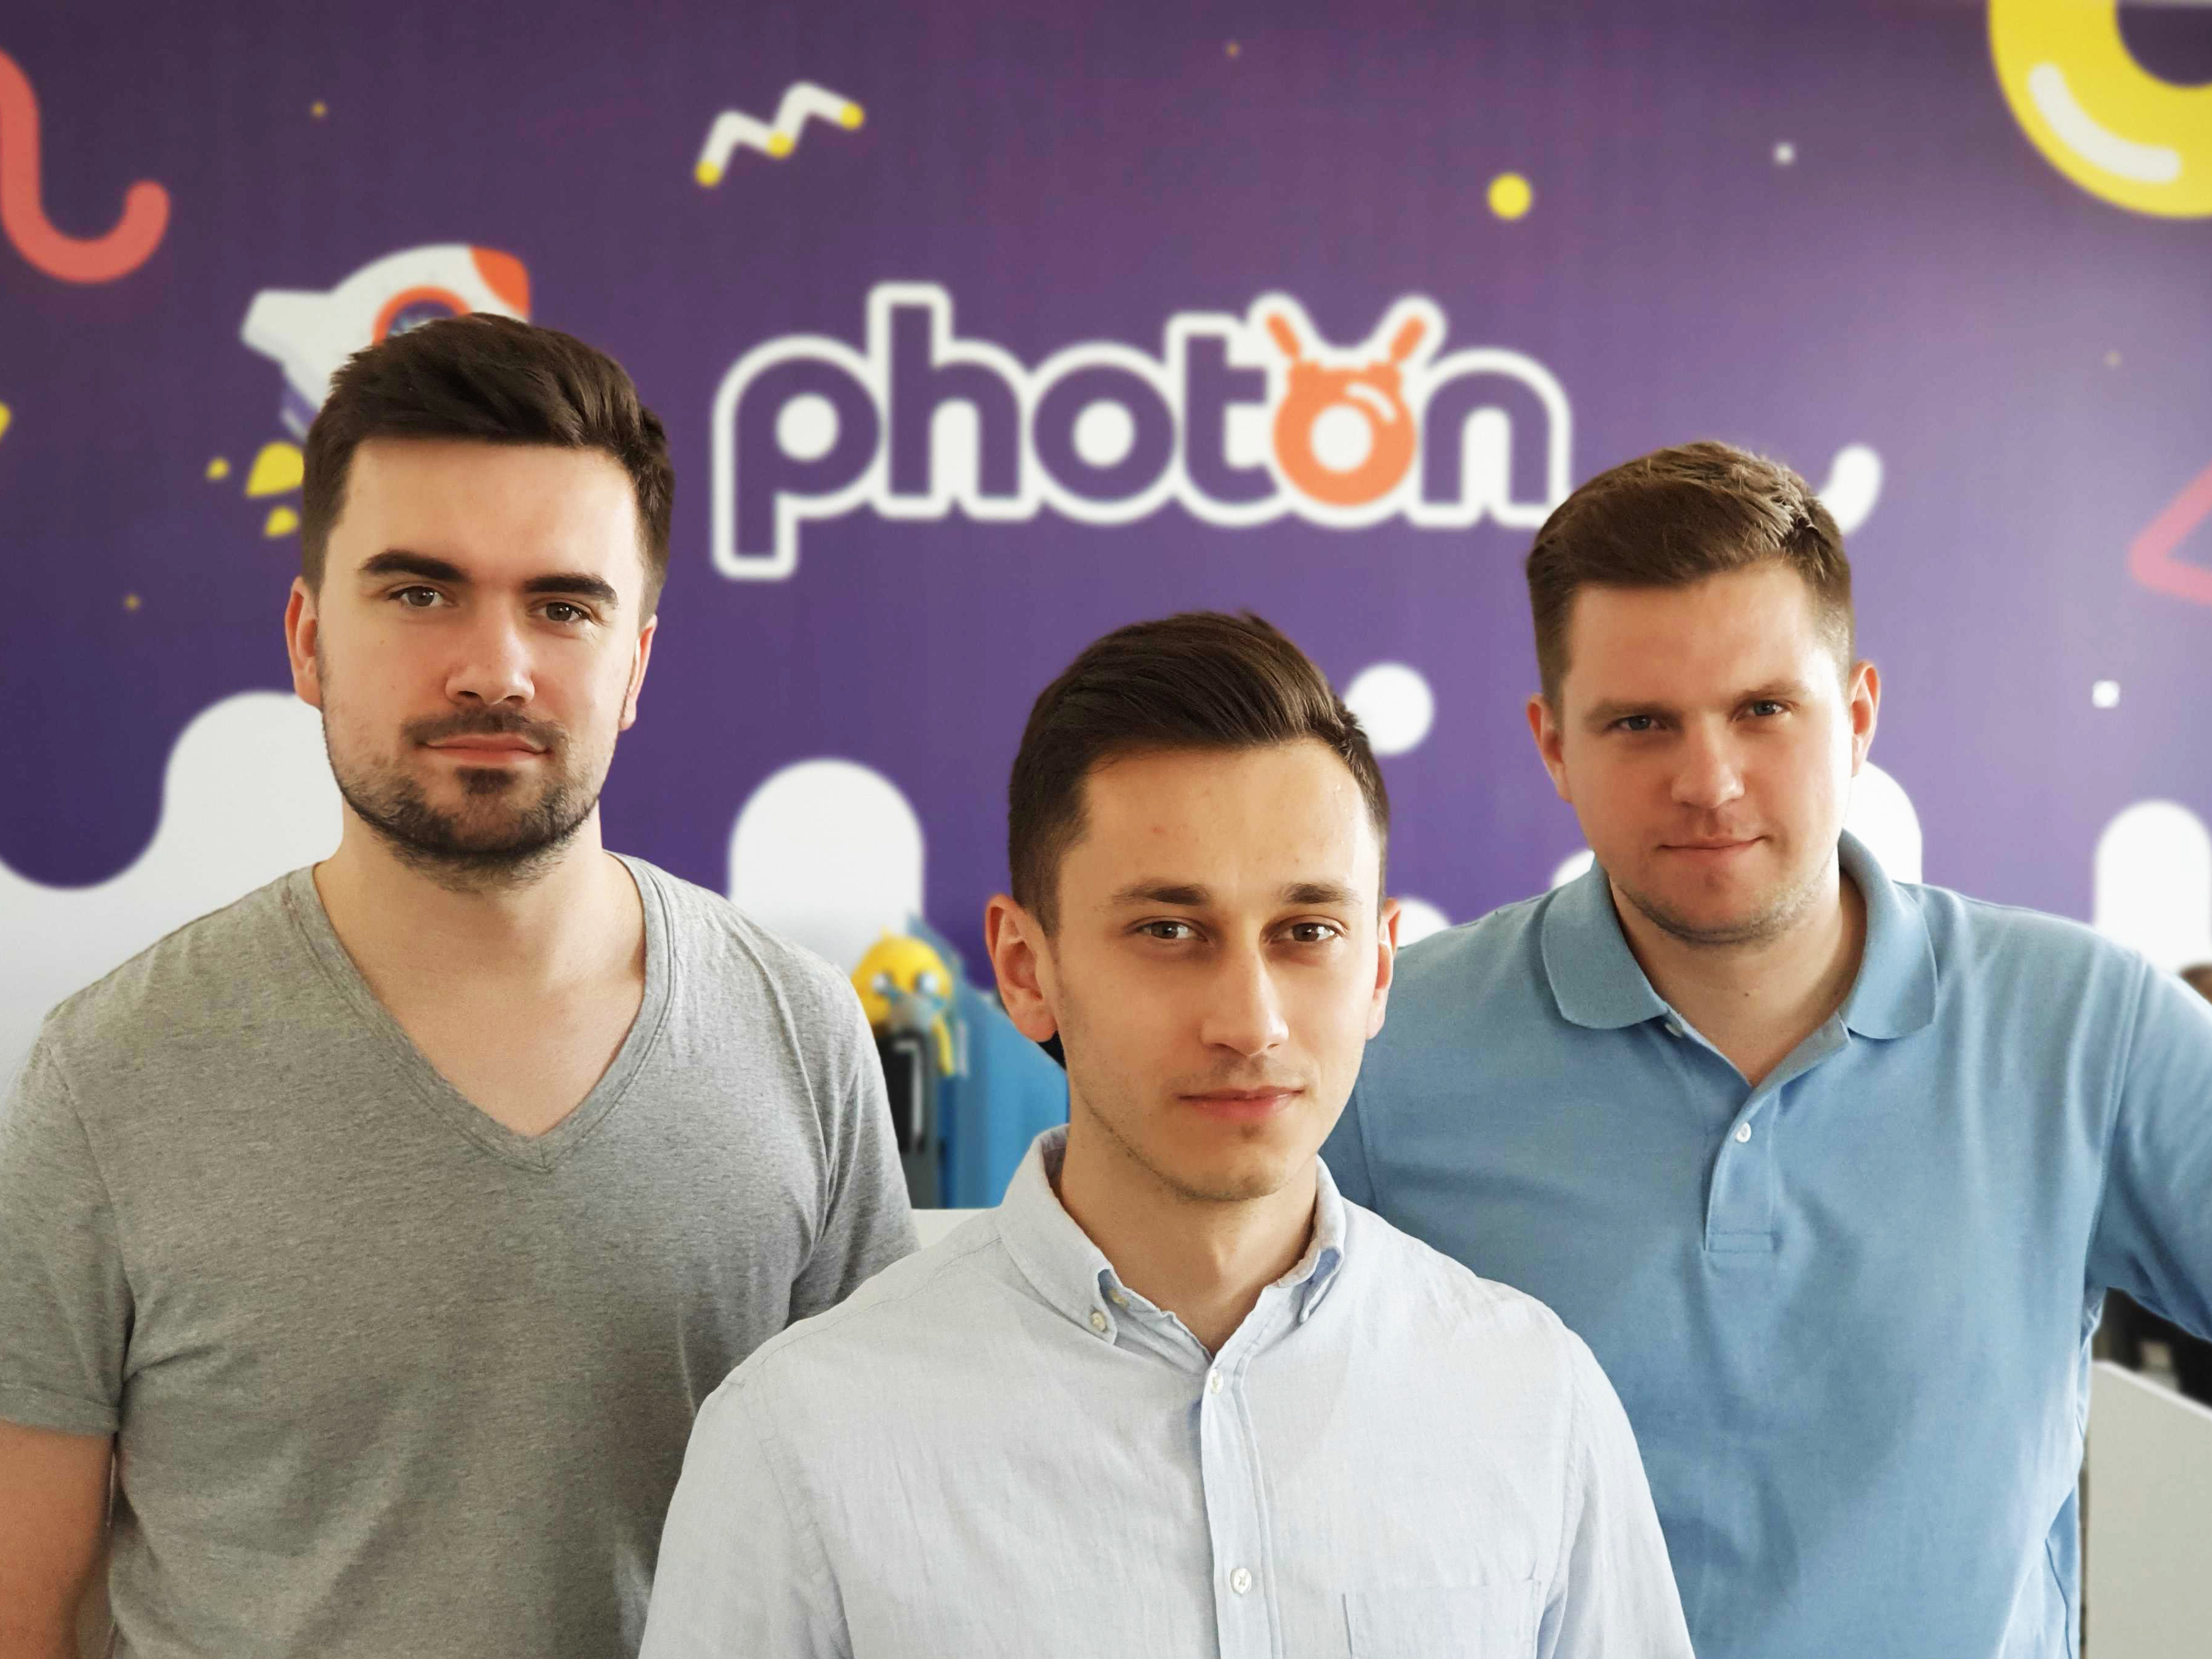 The Photon company created by Michał Grzes, Krzysztof Dziemiańczuk, Marcin Joka, Michał Bogucki and Maciej Kopczyński quickly proved to be a market hit. It is purchased by educational institutions around the world. Its authors are just now planning to launch an analogous assistant for teachers.